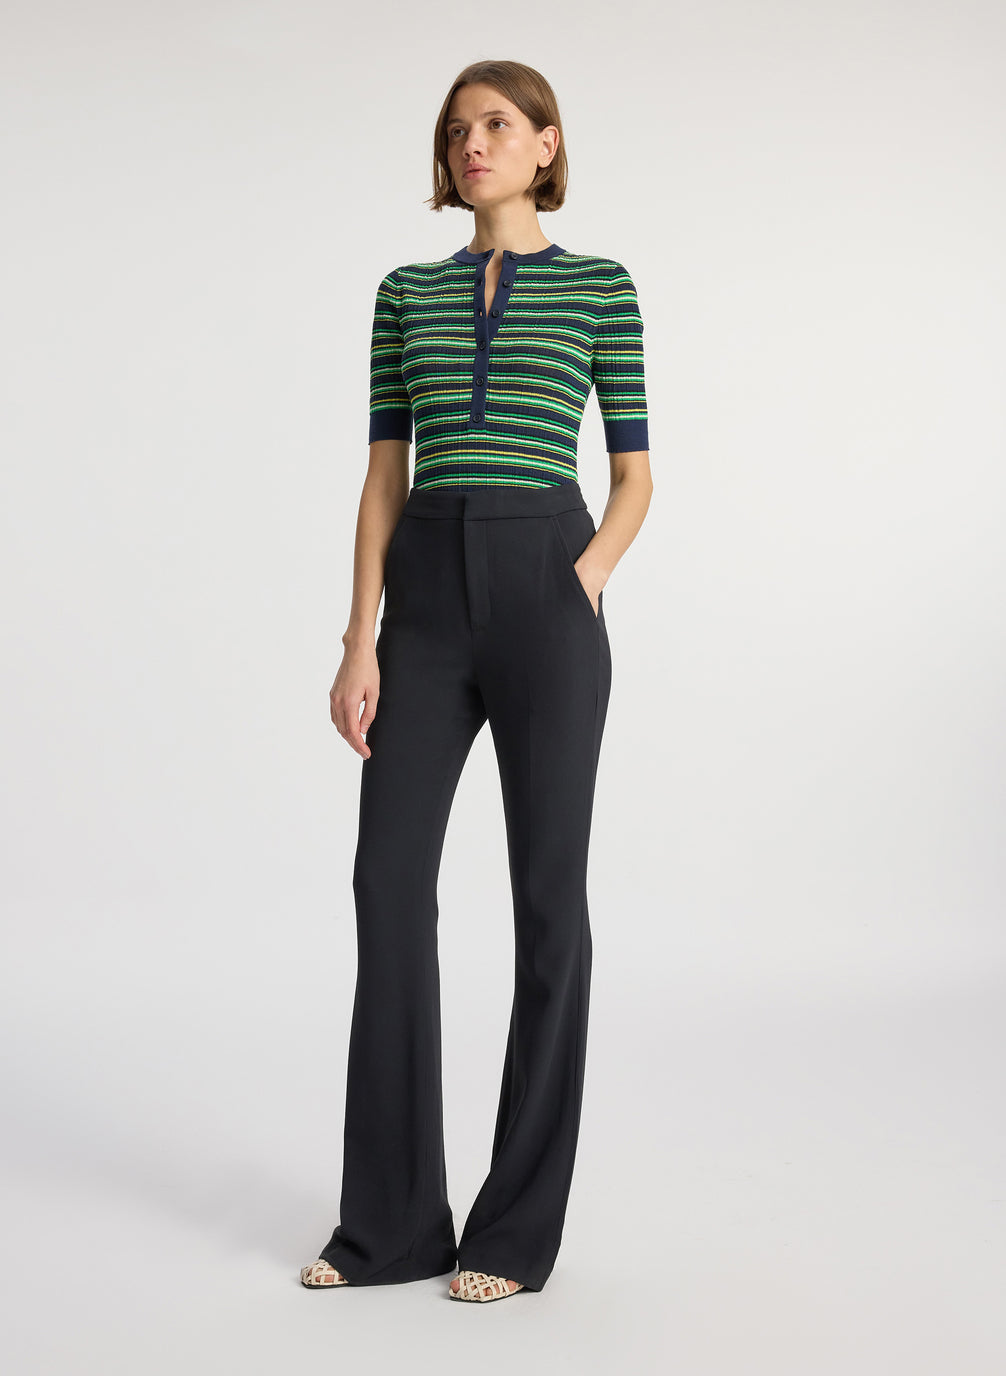 front view of woman wearing navy blue and green striped half sleeve button placket shirt and black pant